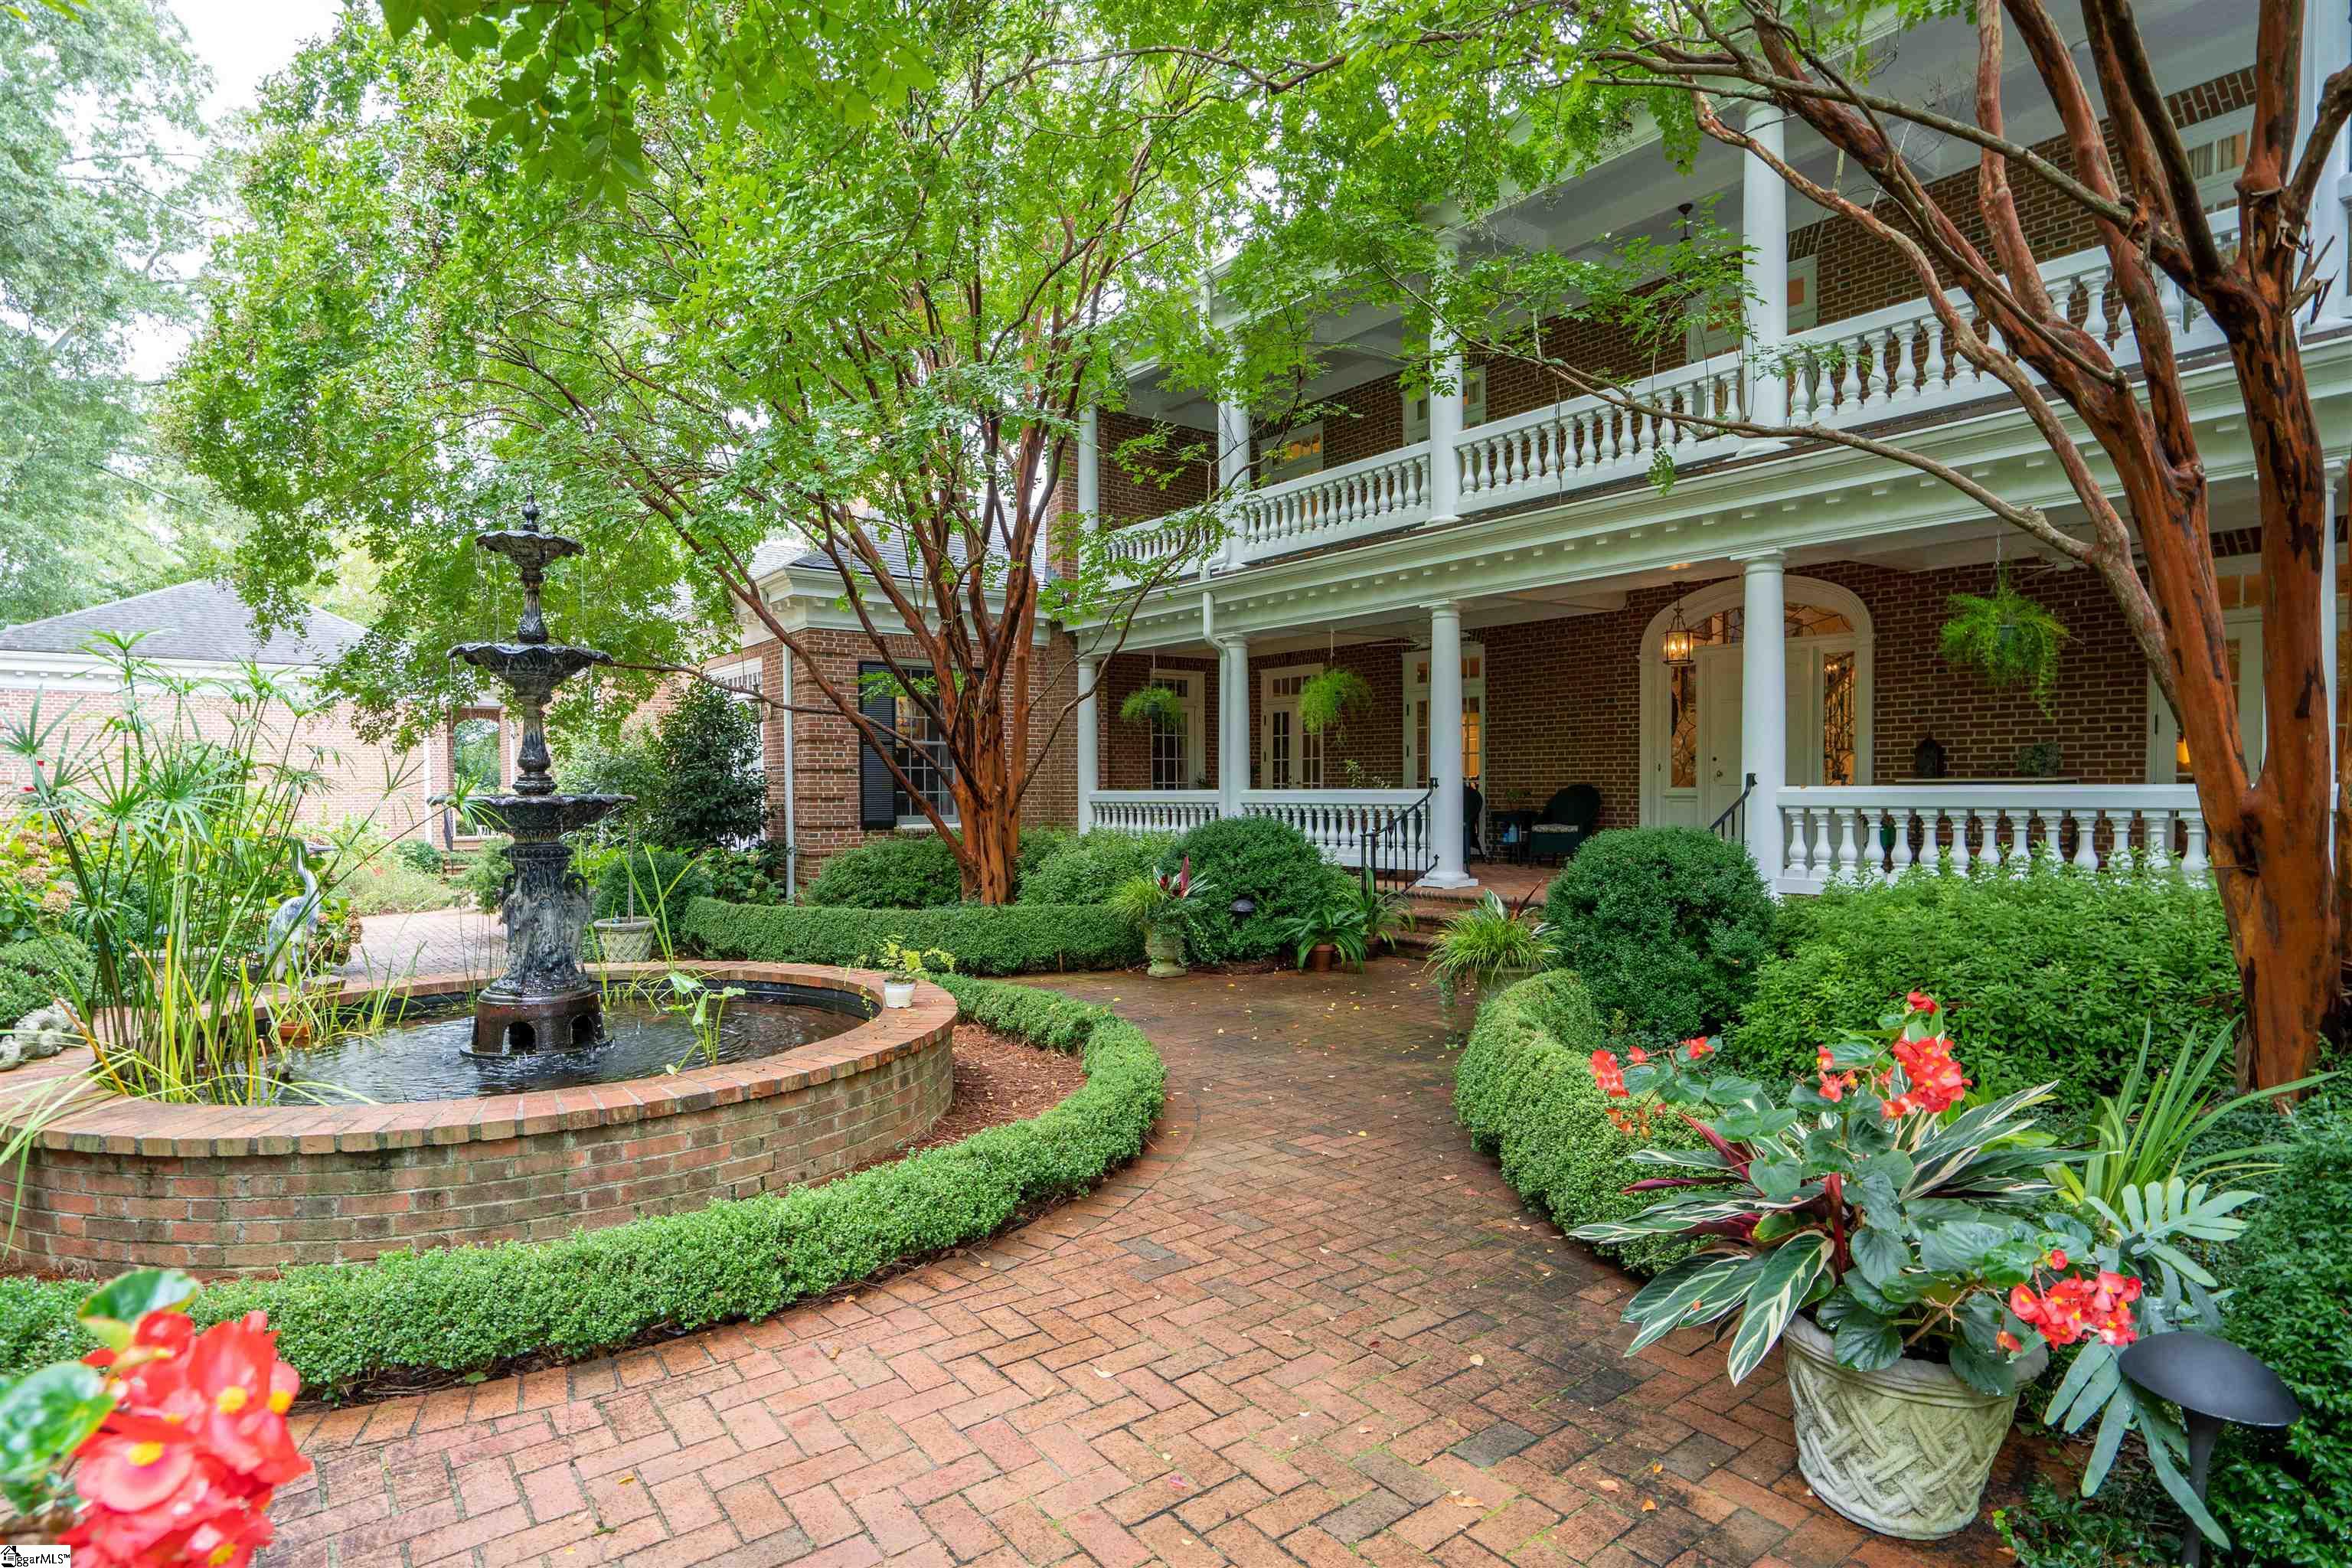 Authentic Charlestonian on Crescent Avenue, finest street in “old Greenville.” Designed by architect Harold Mack ‘89. Covered porches, private walled courtyard & abundant gardens center around fountain, a year round gathering space. Exquisite features: 10’ ceilings, beautiful hardwoods, custom “floating” staircase, three fireplaces, mahogany paneled Den, walk-in wet bar, spacious granite Kitchen, grand Dining room. 1st flr master wing w/study, separate His & Hers baths, dressing rooms, multiple closets. Upstairs: 2 bedroom suites, & huge walk in attic with icynene insulation, great expansion potential. Sellers added full apartment w/Ktchn, laundry & study above 3 car garage. Front & back driveways. 24 hr notice & VOF required. SOLD COMPS: 810 Crescent, 111 Boxwood, 412 Crescent